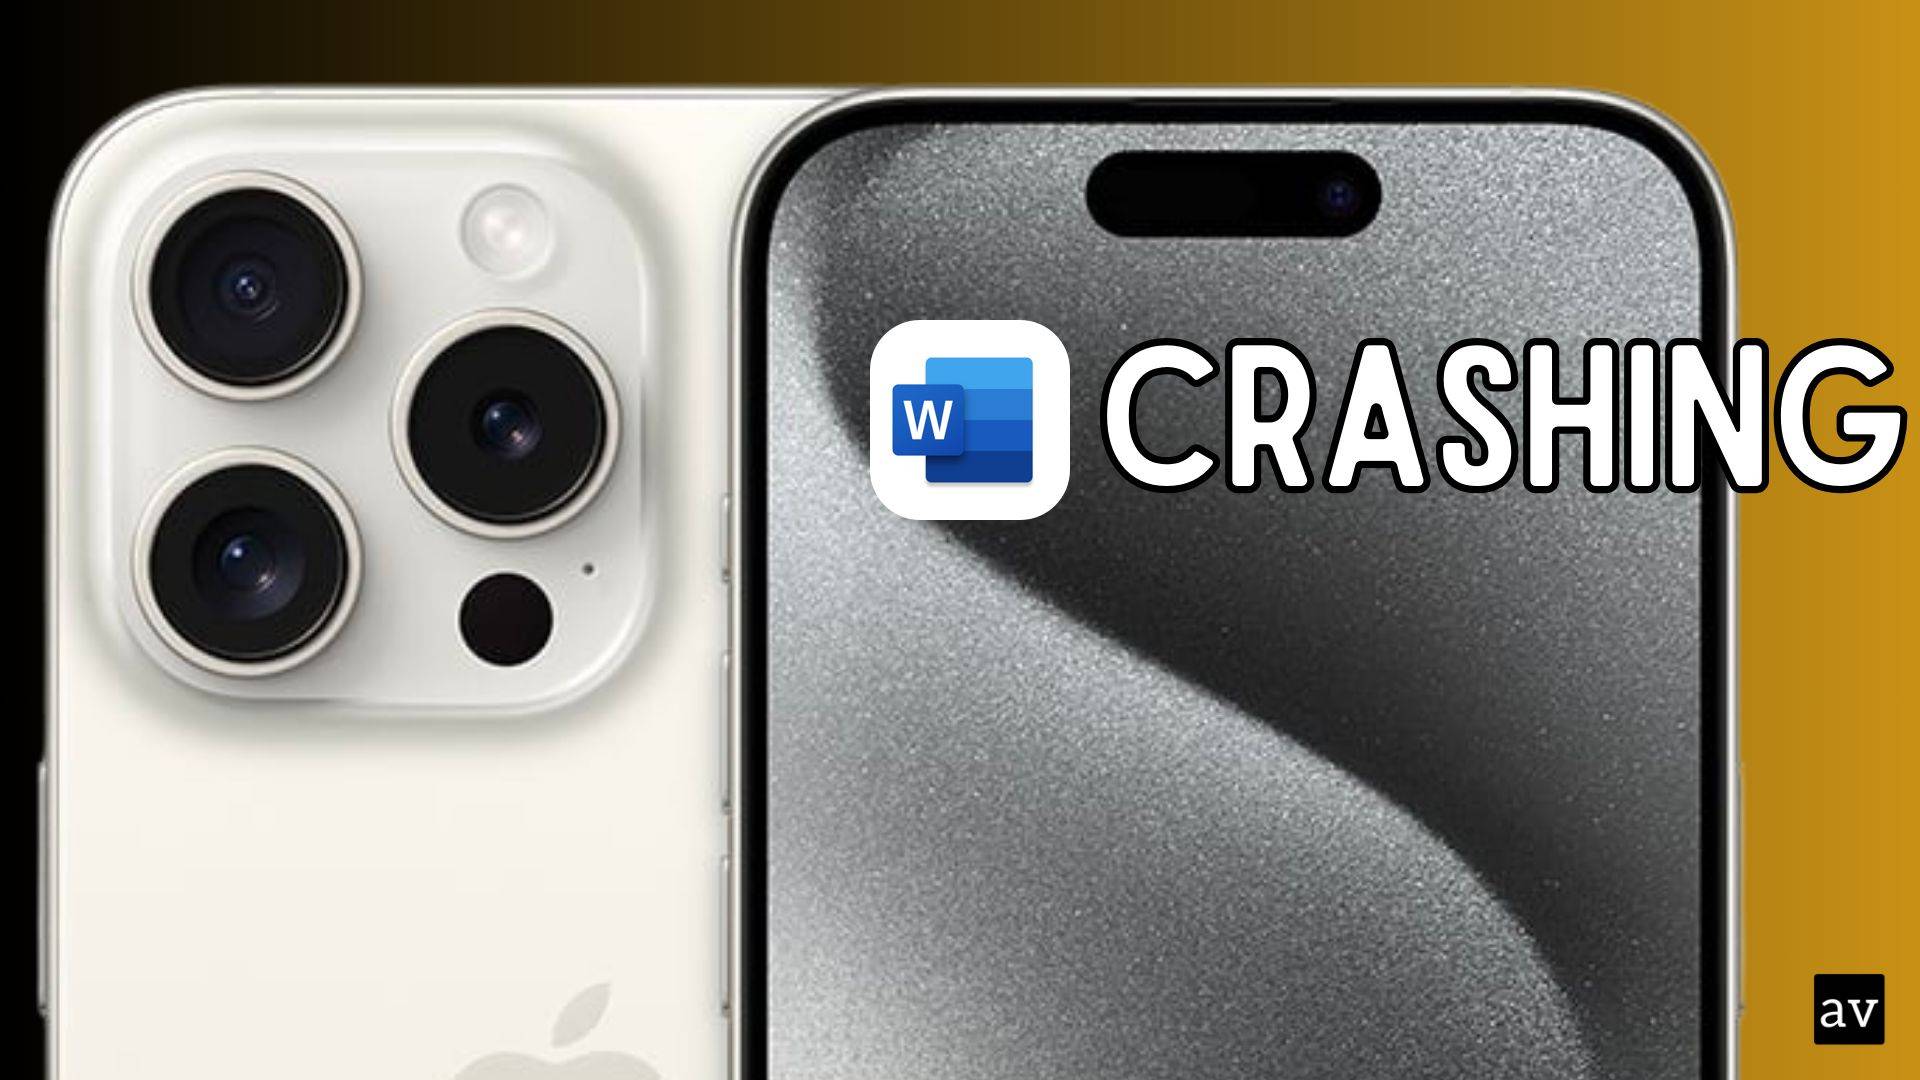 Microsoft Word and its fix of crashing by AppleVeteran